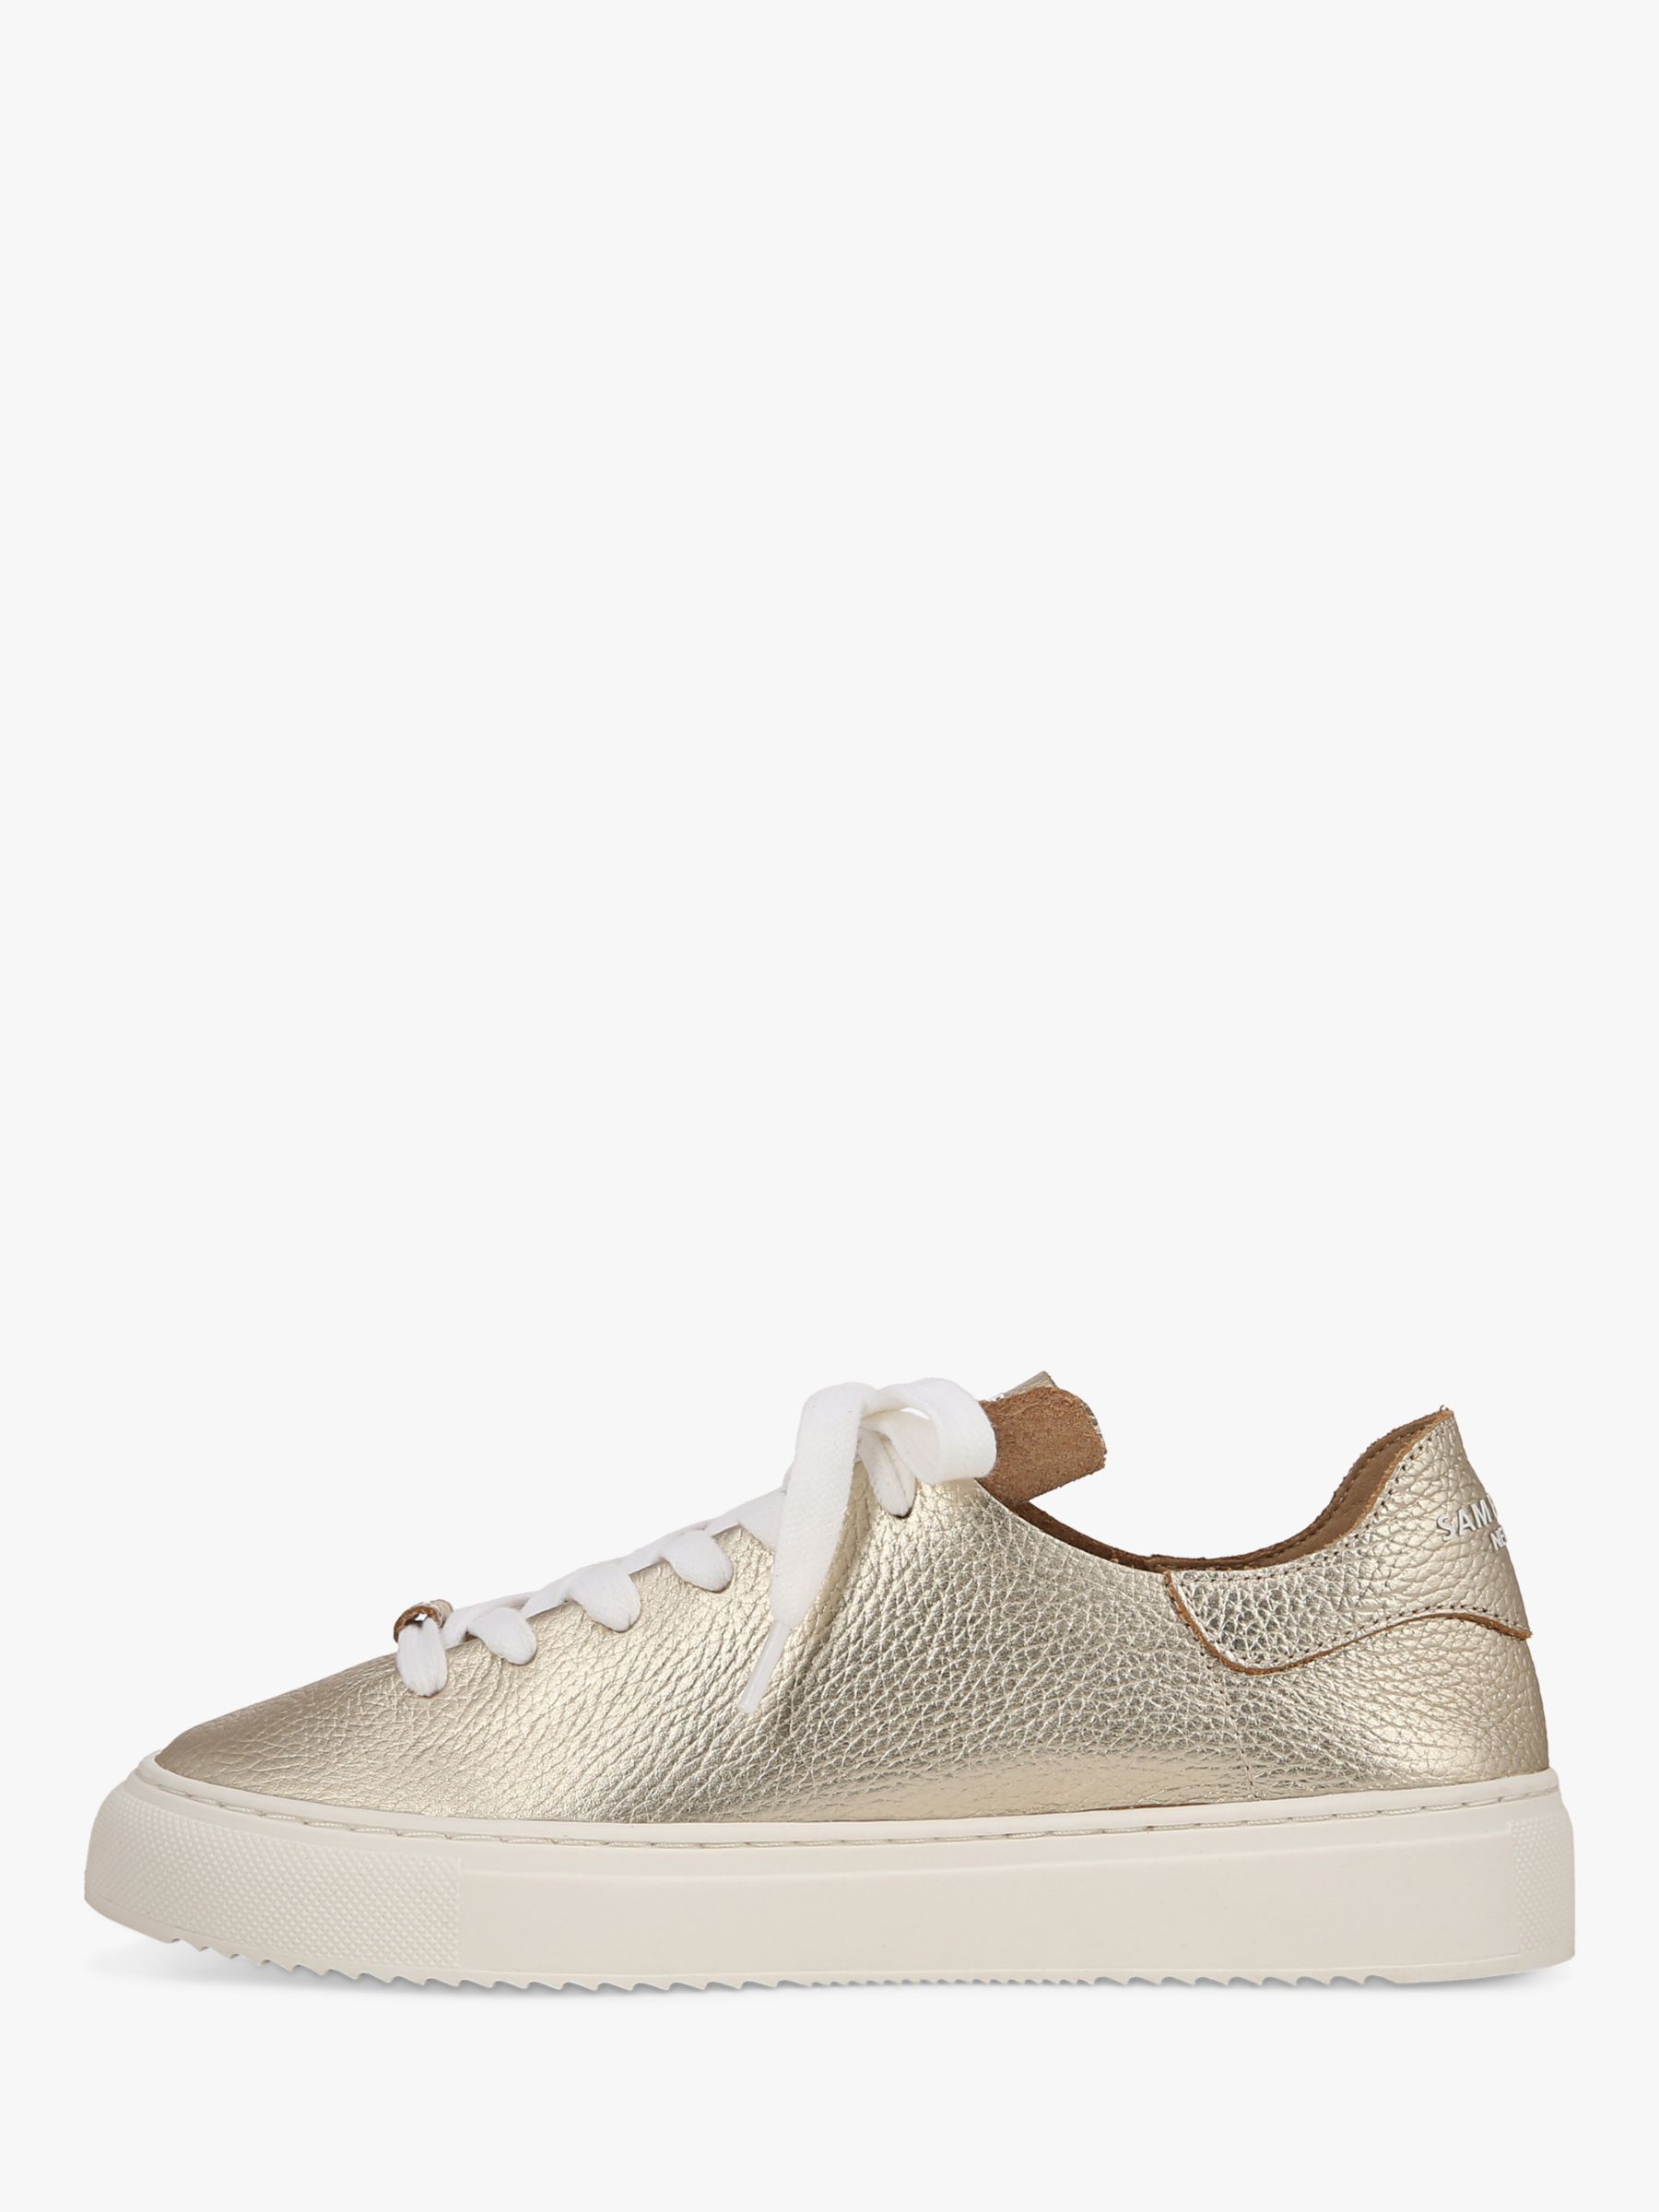 Buy Sam Edelman Poppy Leather Trainers Online at johnlewis.com